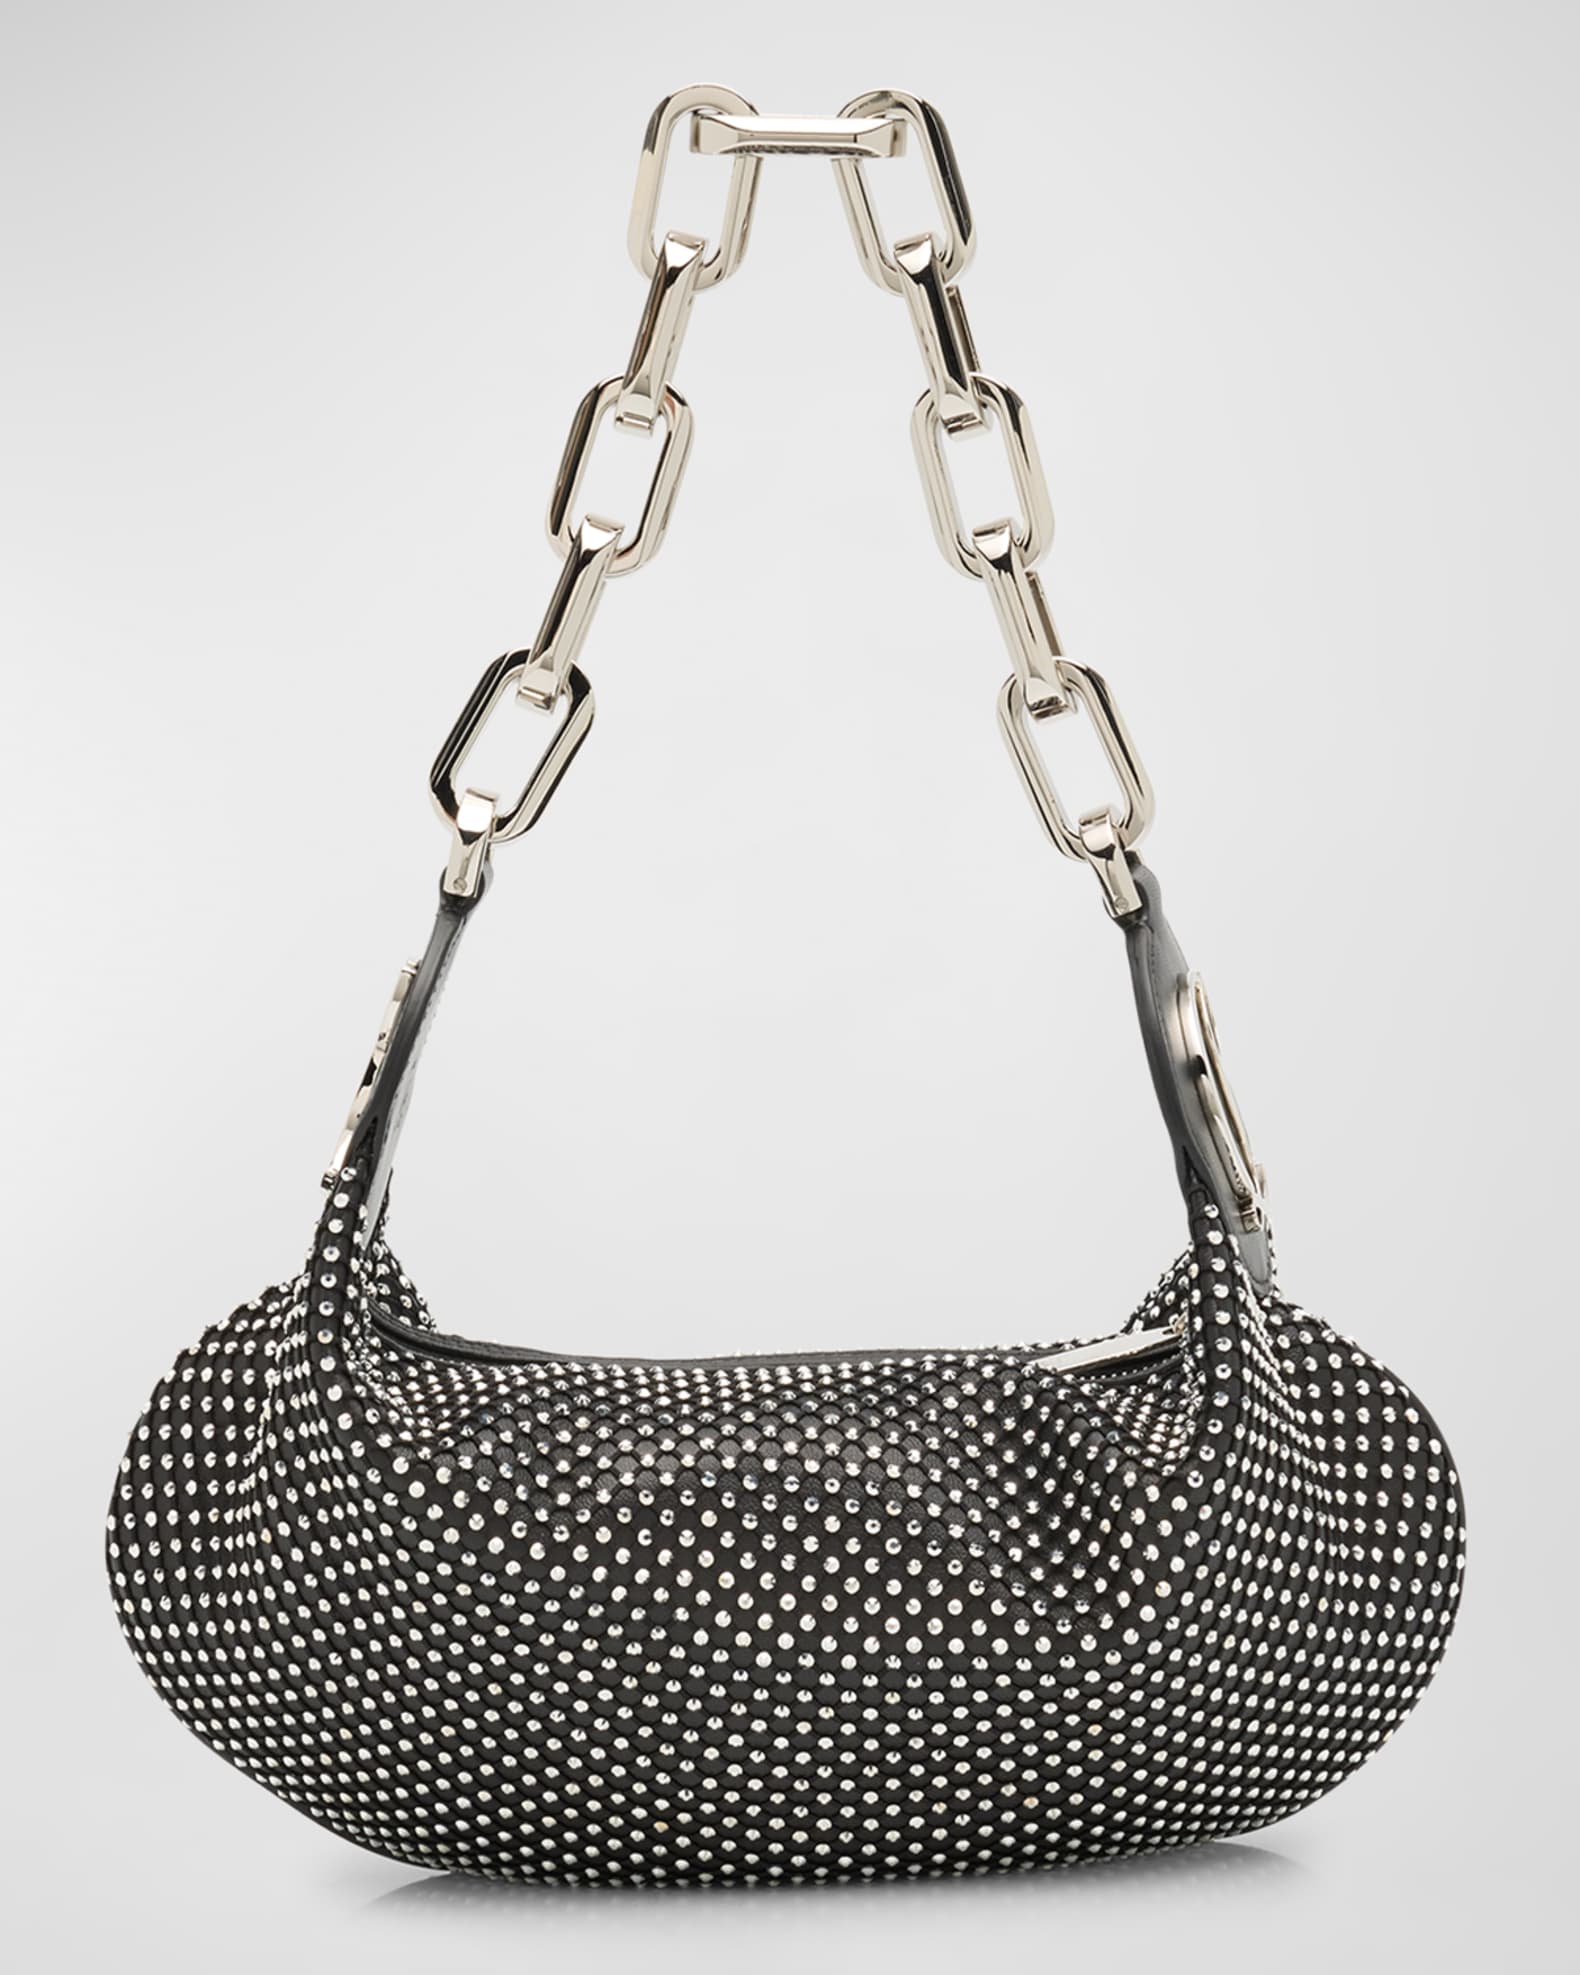 Le 54 Chain Shoulder Bag in Strass Netting Nappa